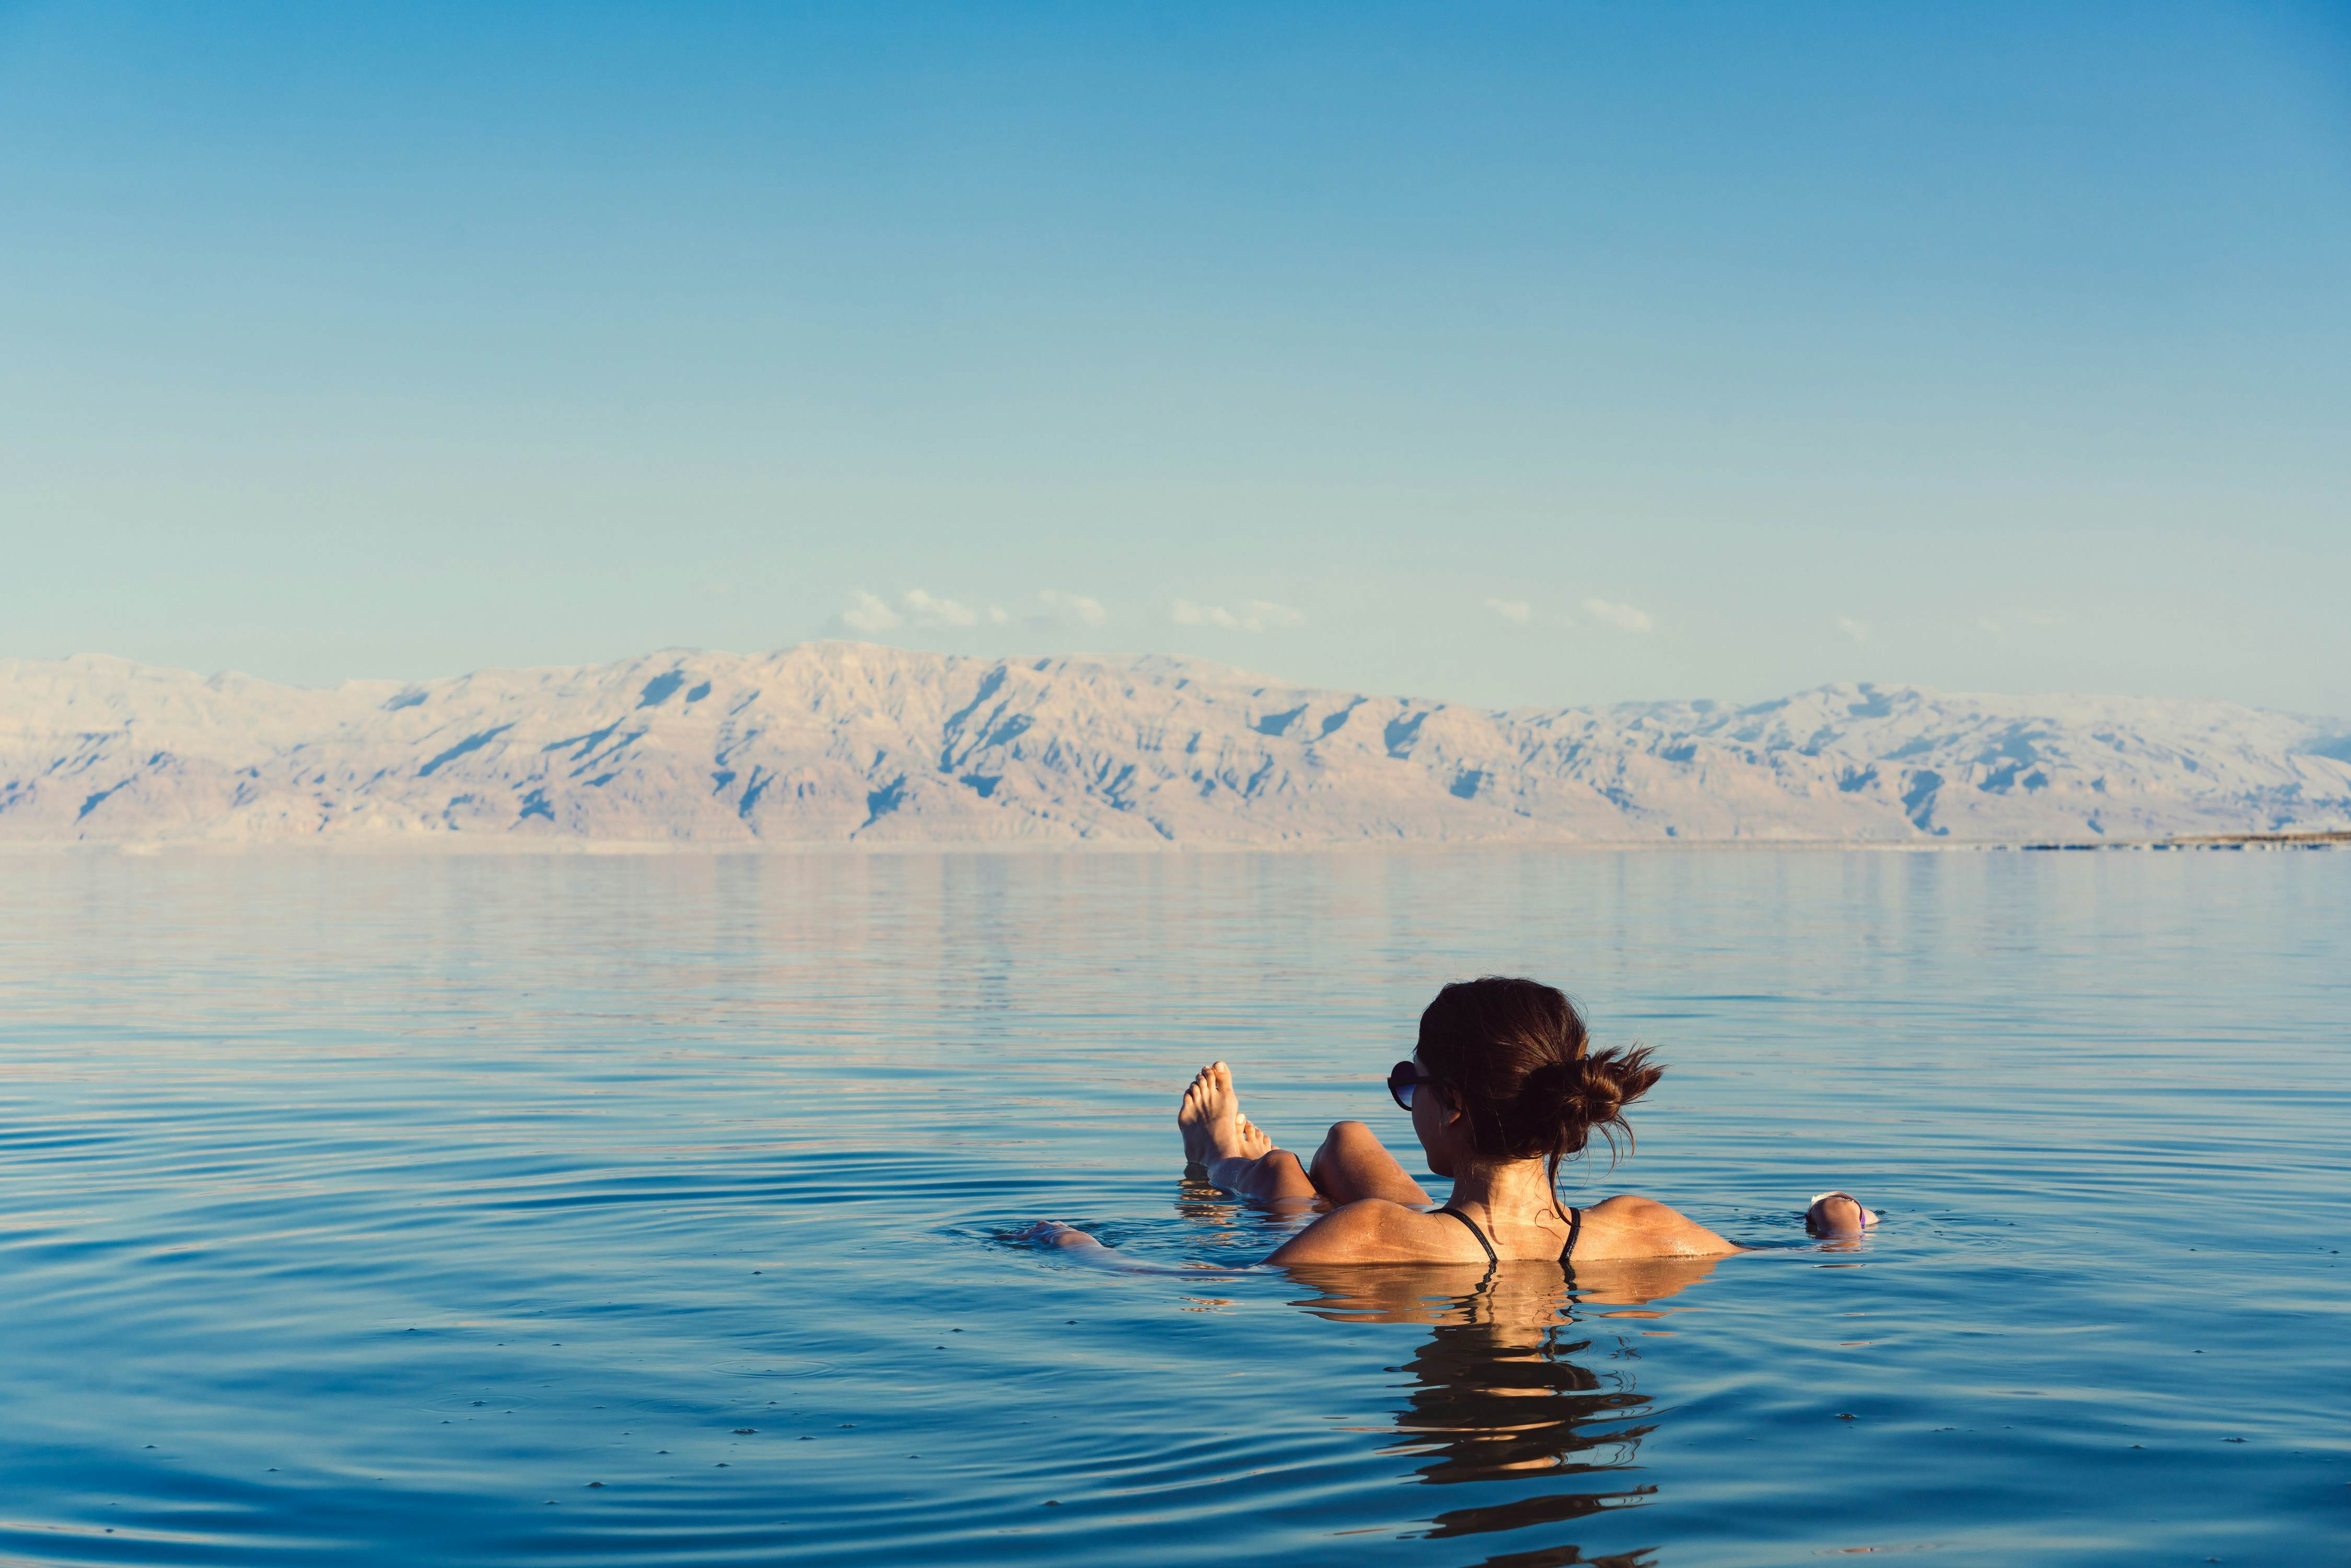 Dead Sea travel - Lonely Planet